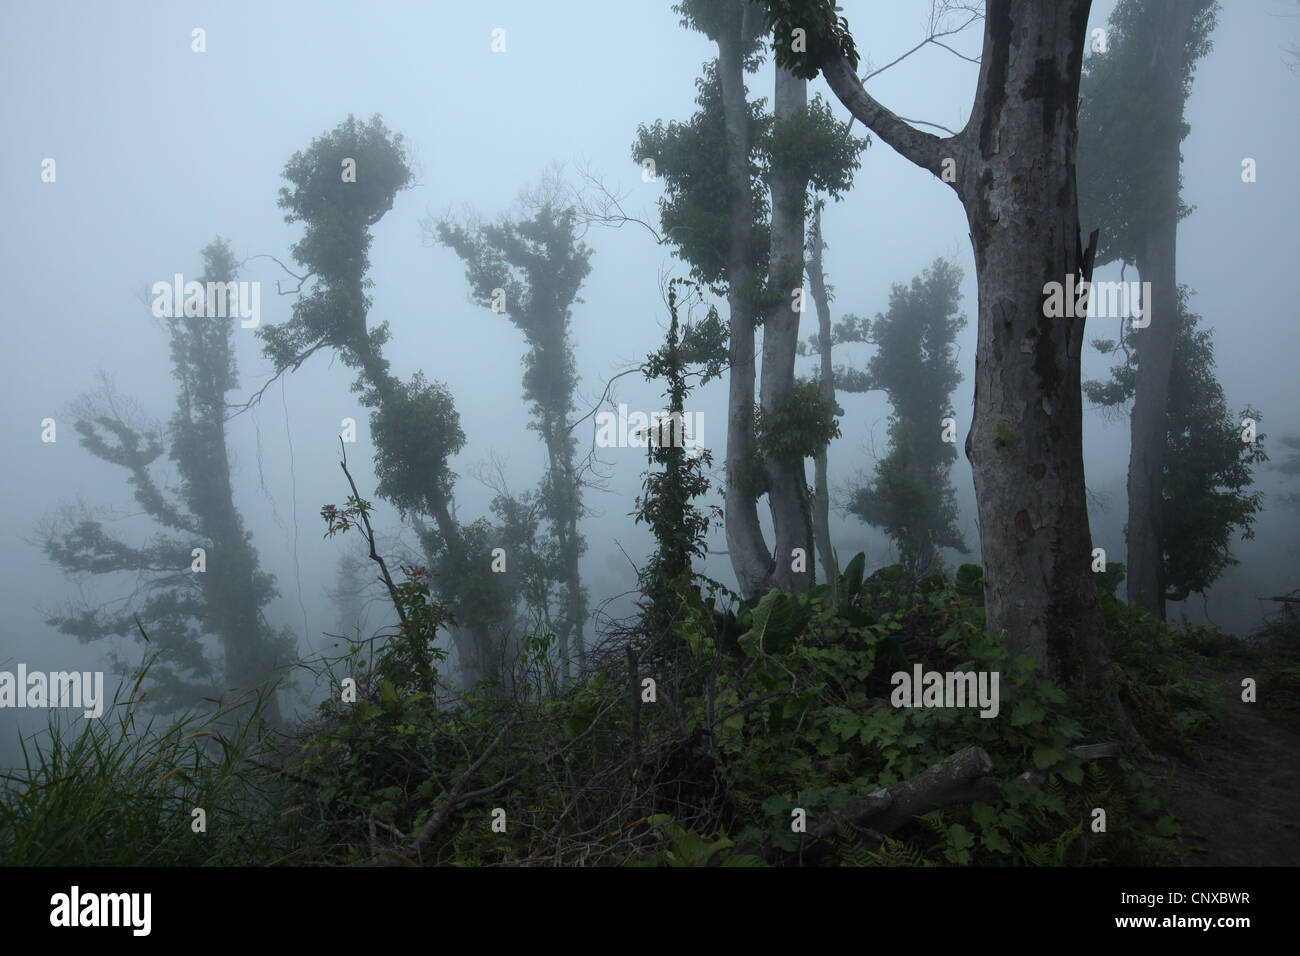 Tropical forest on the slopes of Mount Merapi (2,930 m) in Central Java, Indonesia. Stock Photo